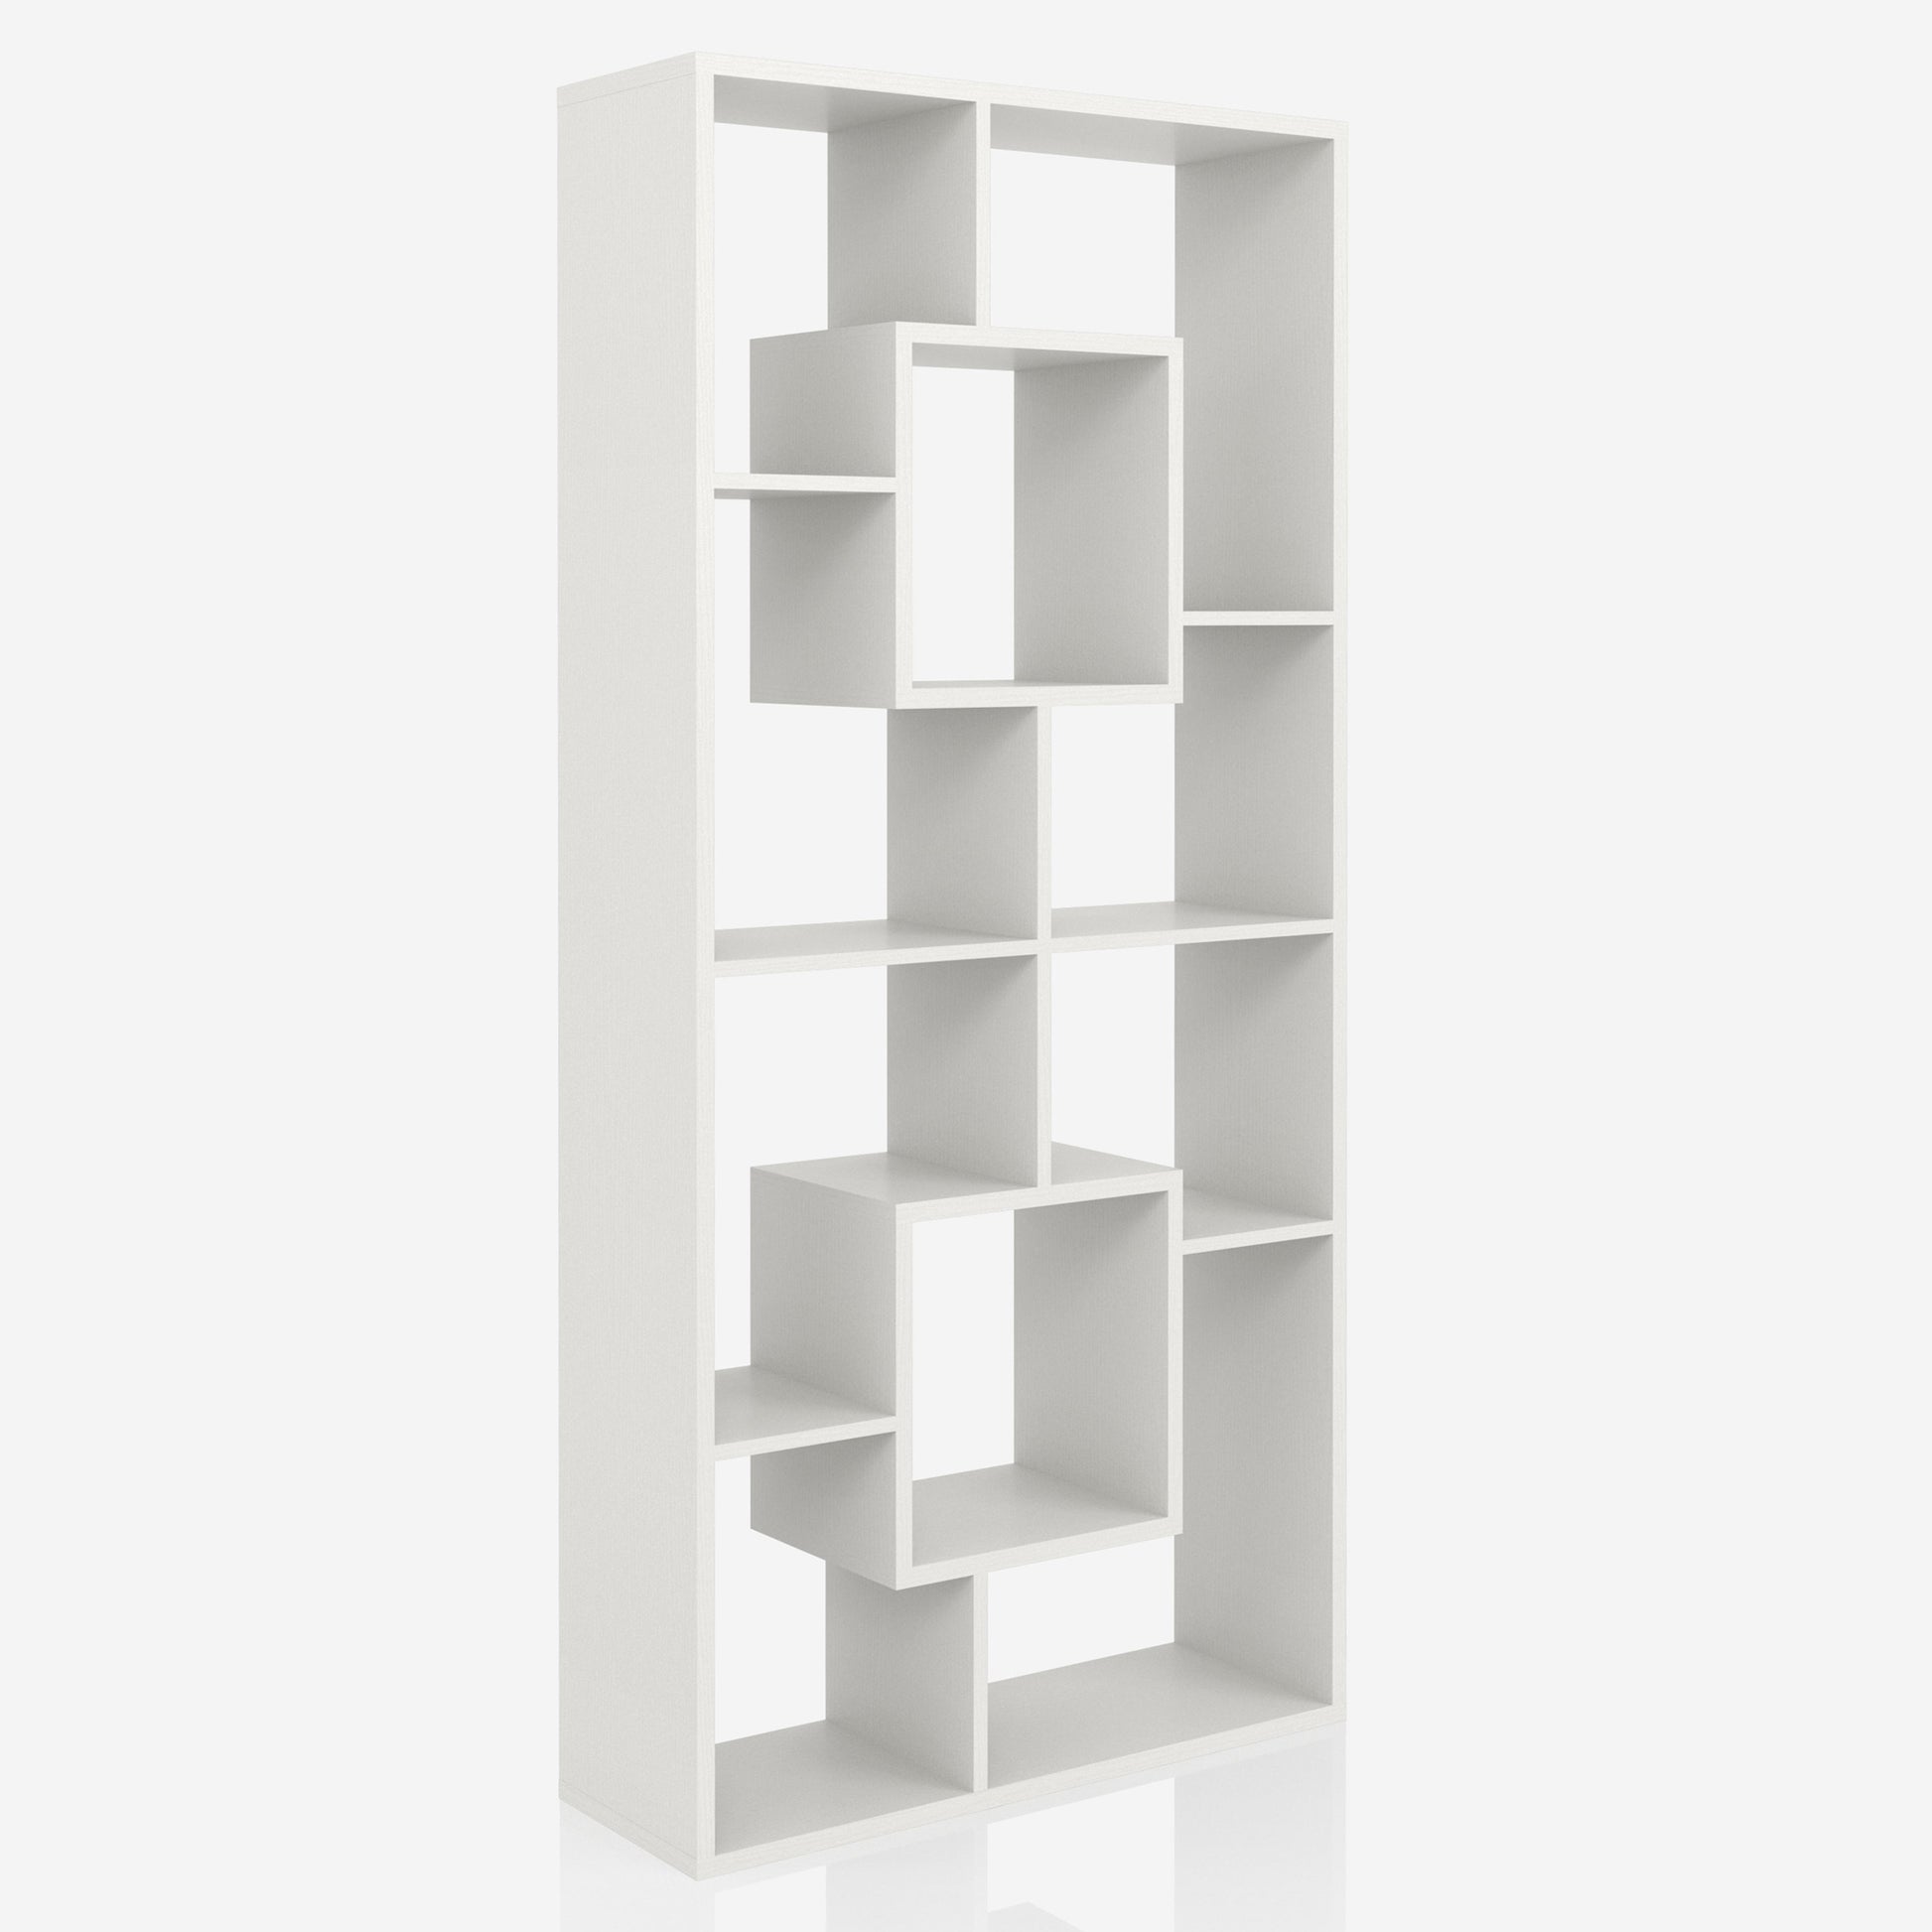 Right angled modern white geometric cube open display bookcase on a white background